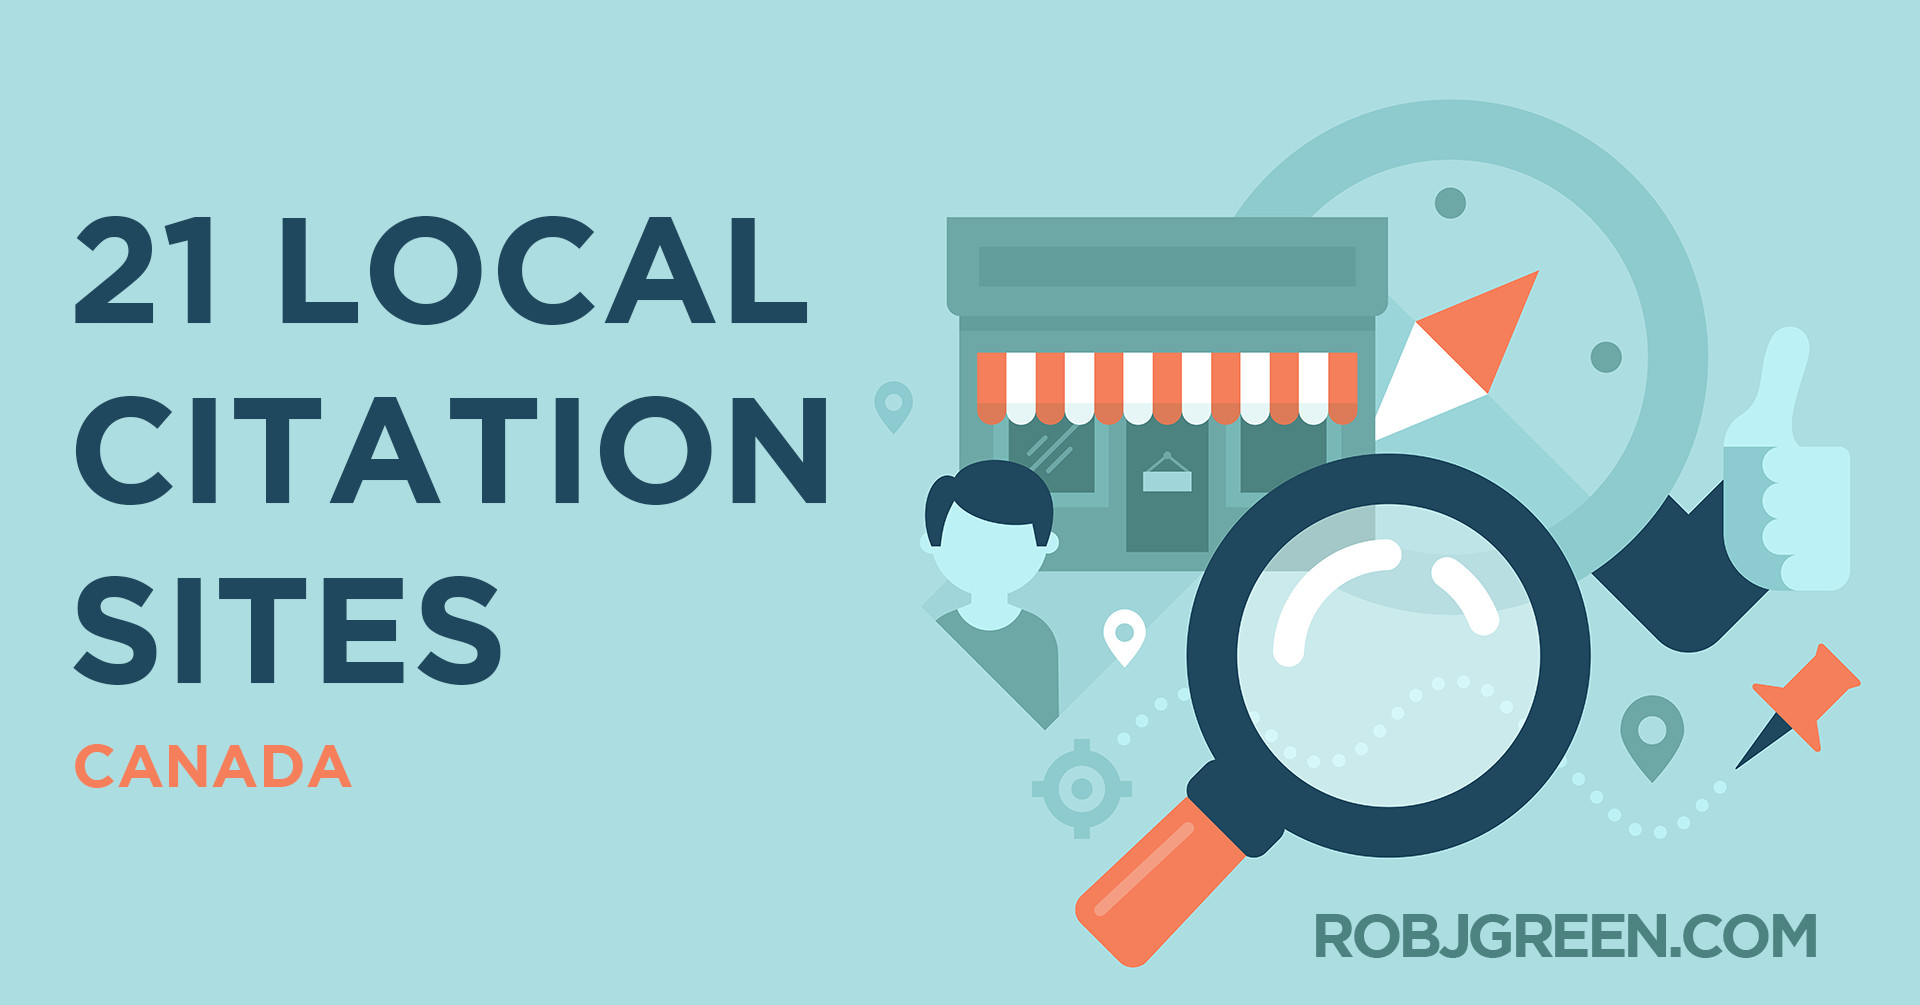 21 Local Citation Sites for Canadian Businesses